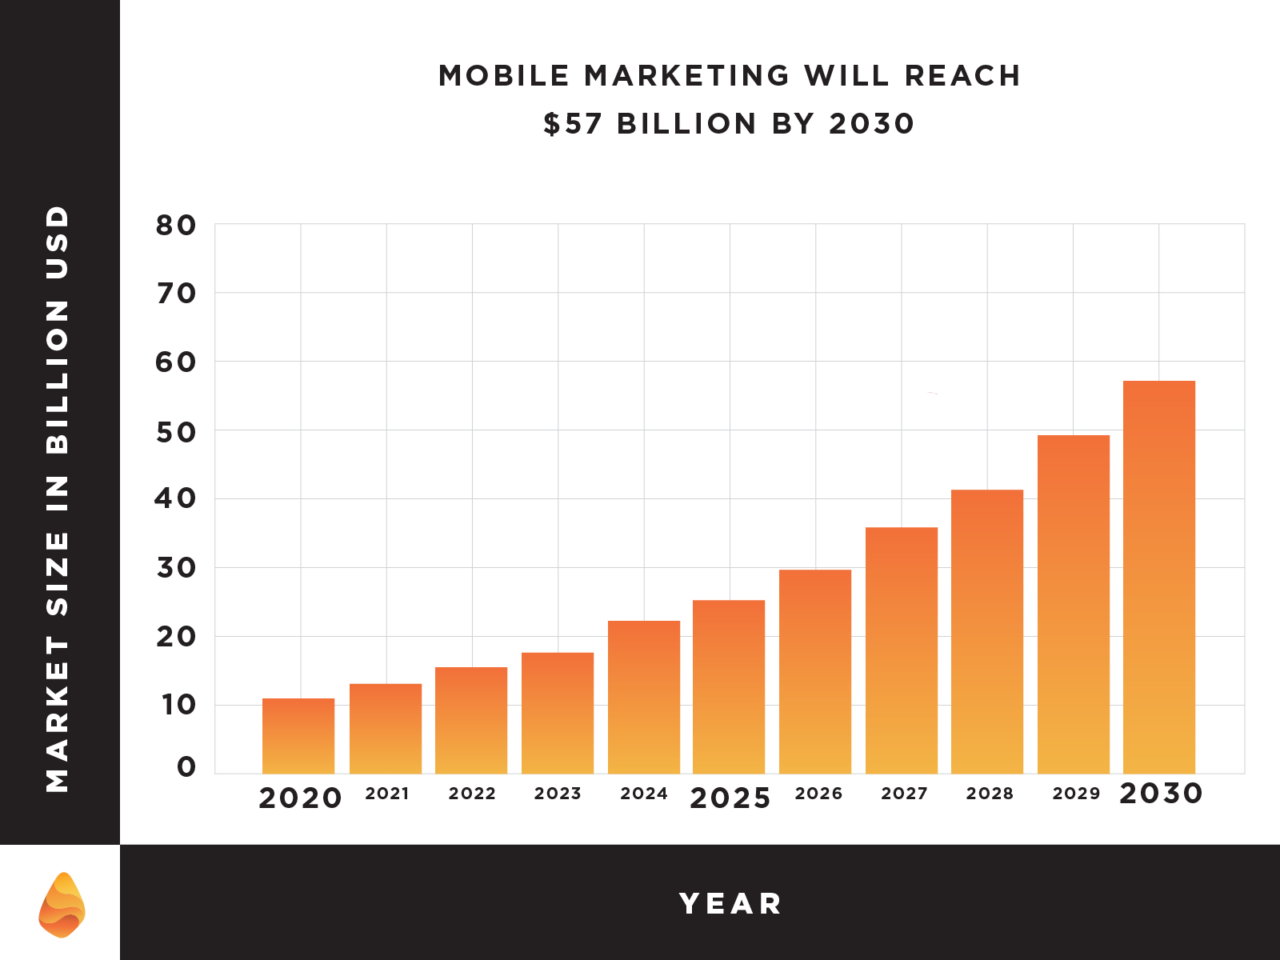 Graph showing that mobile marketing will reach $57 billion by 2030